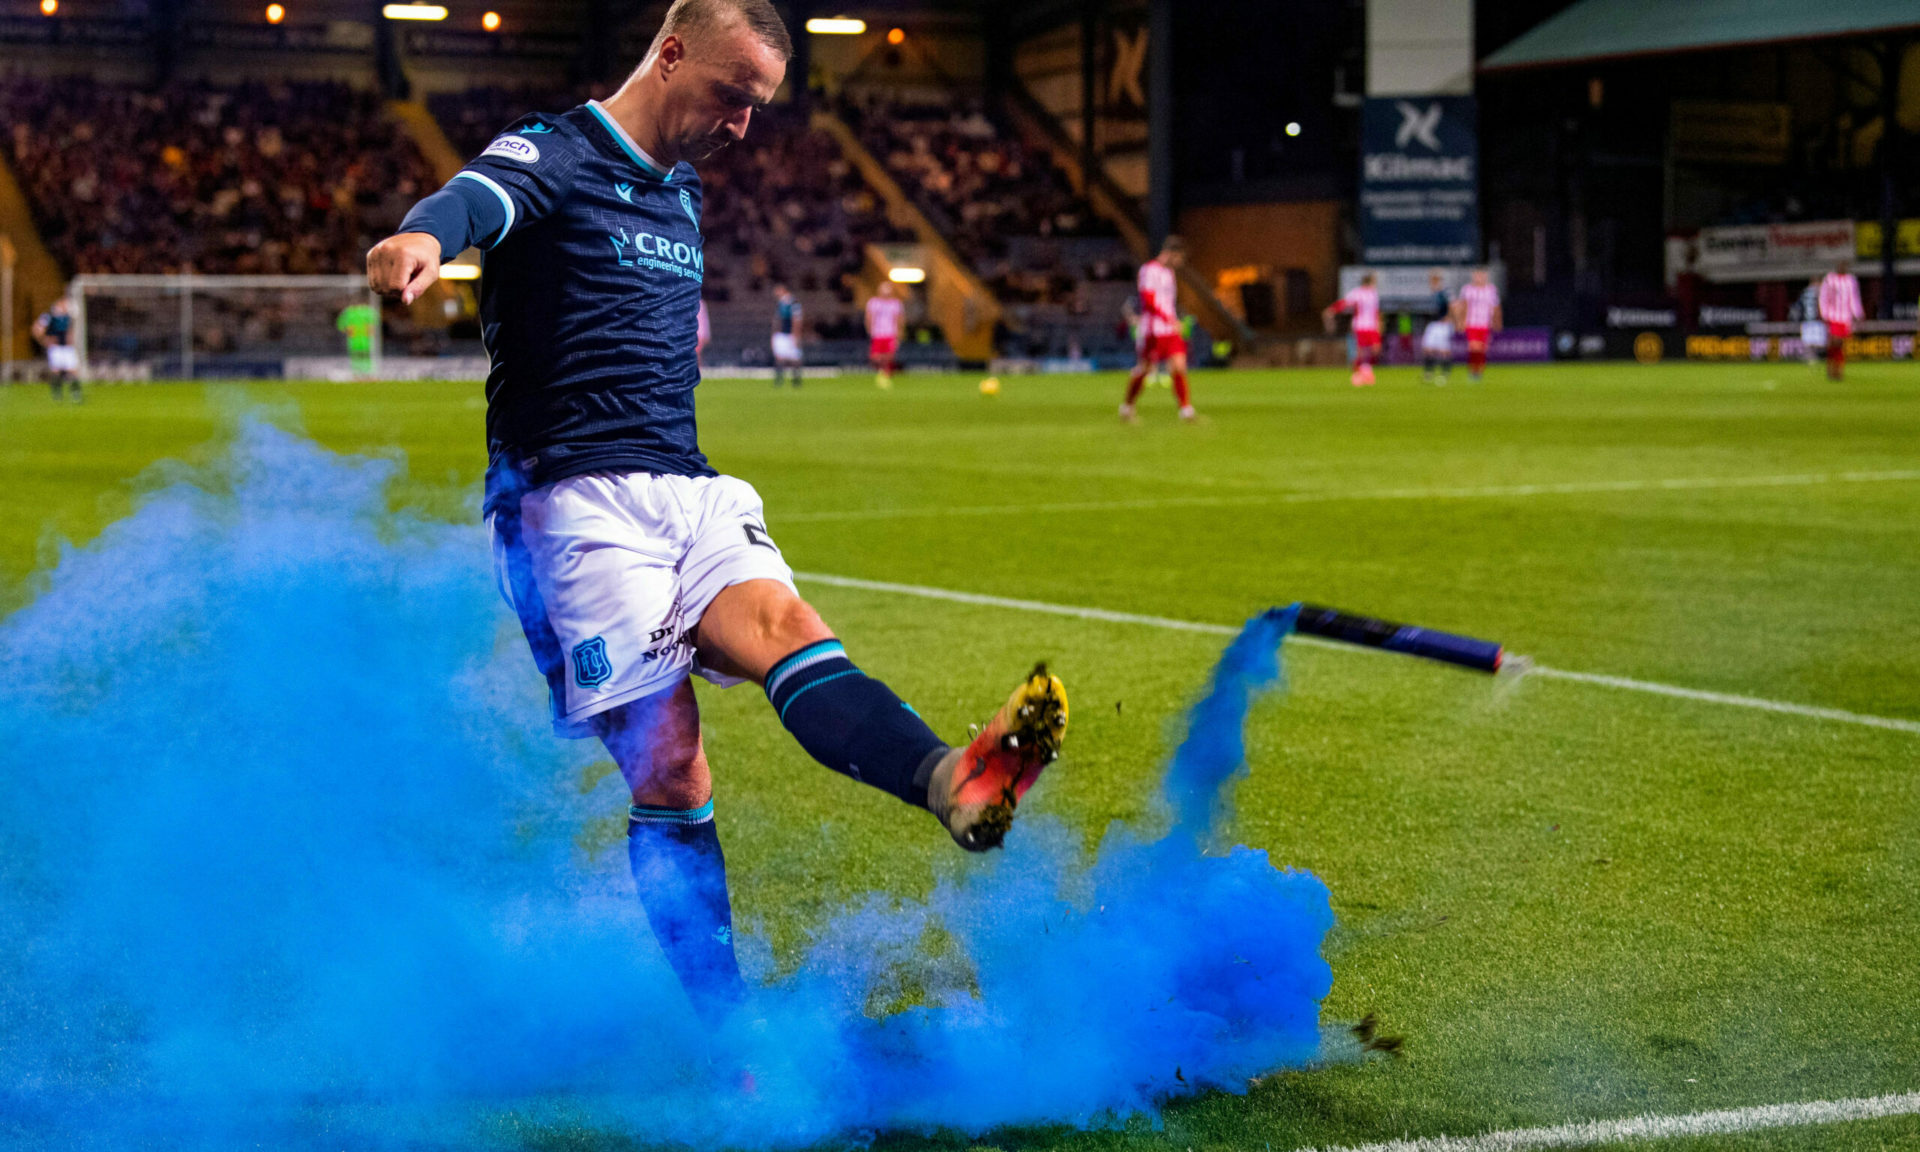 Leigh Griffiths kicking smoke bomb back at audience